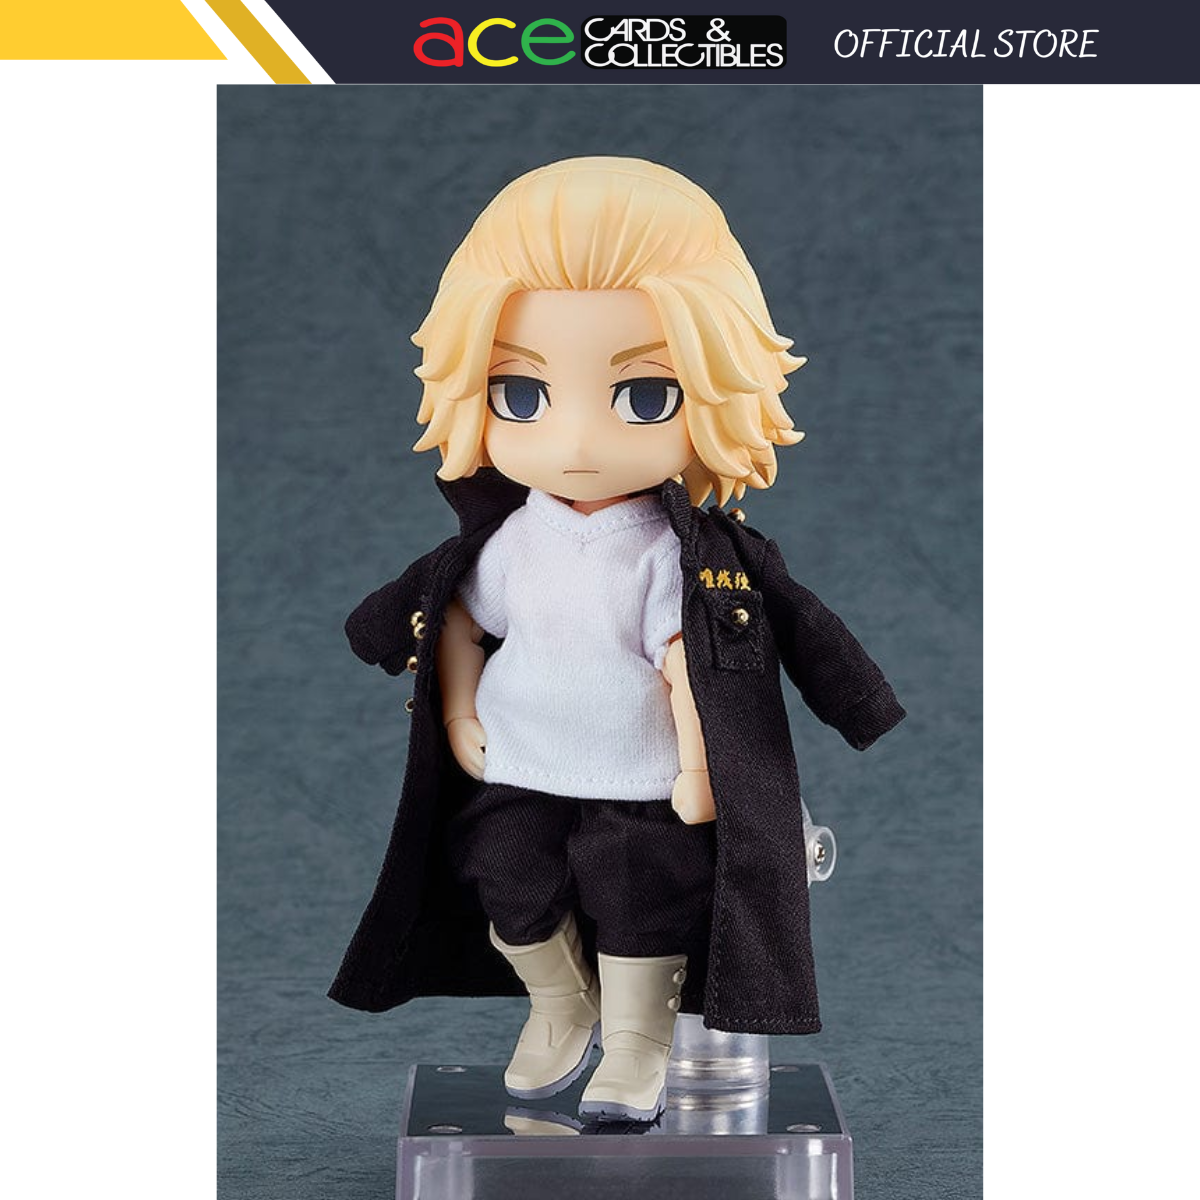 Tokyo Revengers Nendoroid Doll "Mikey Manjiro Sano"-Good Smile Company-Ace Cards & Collectibles